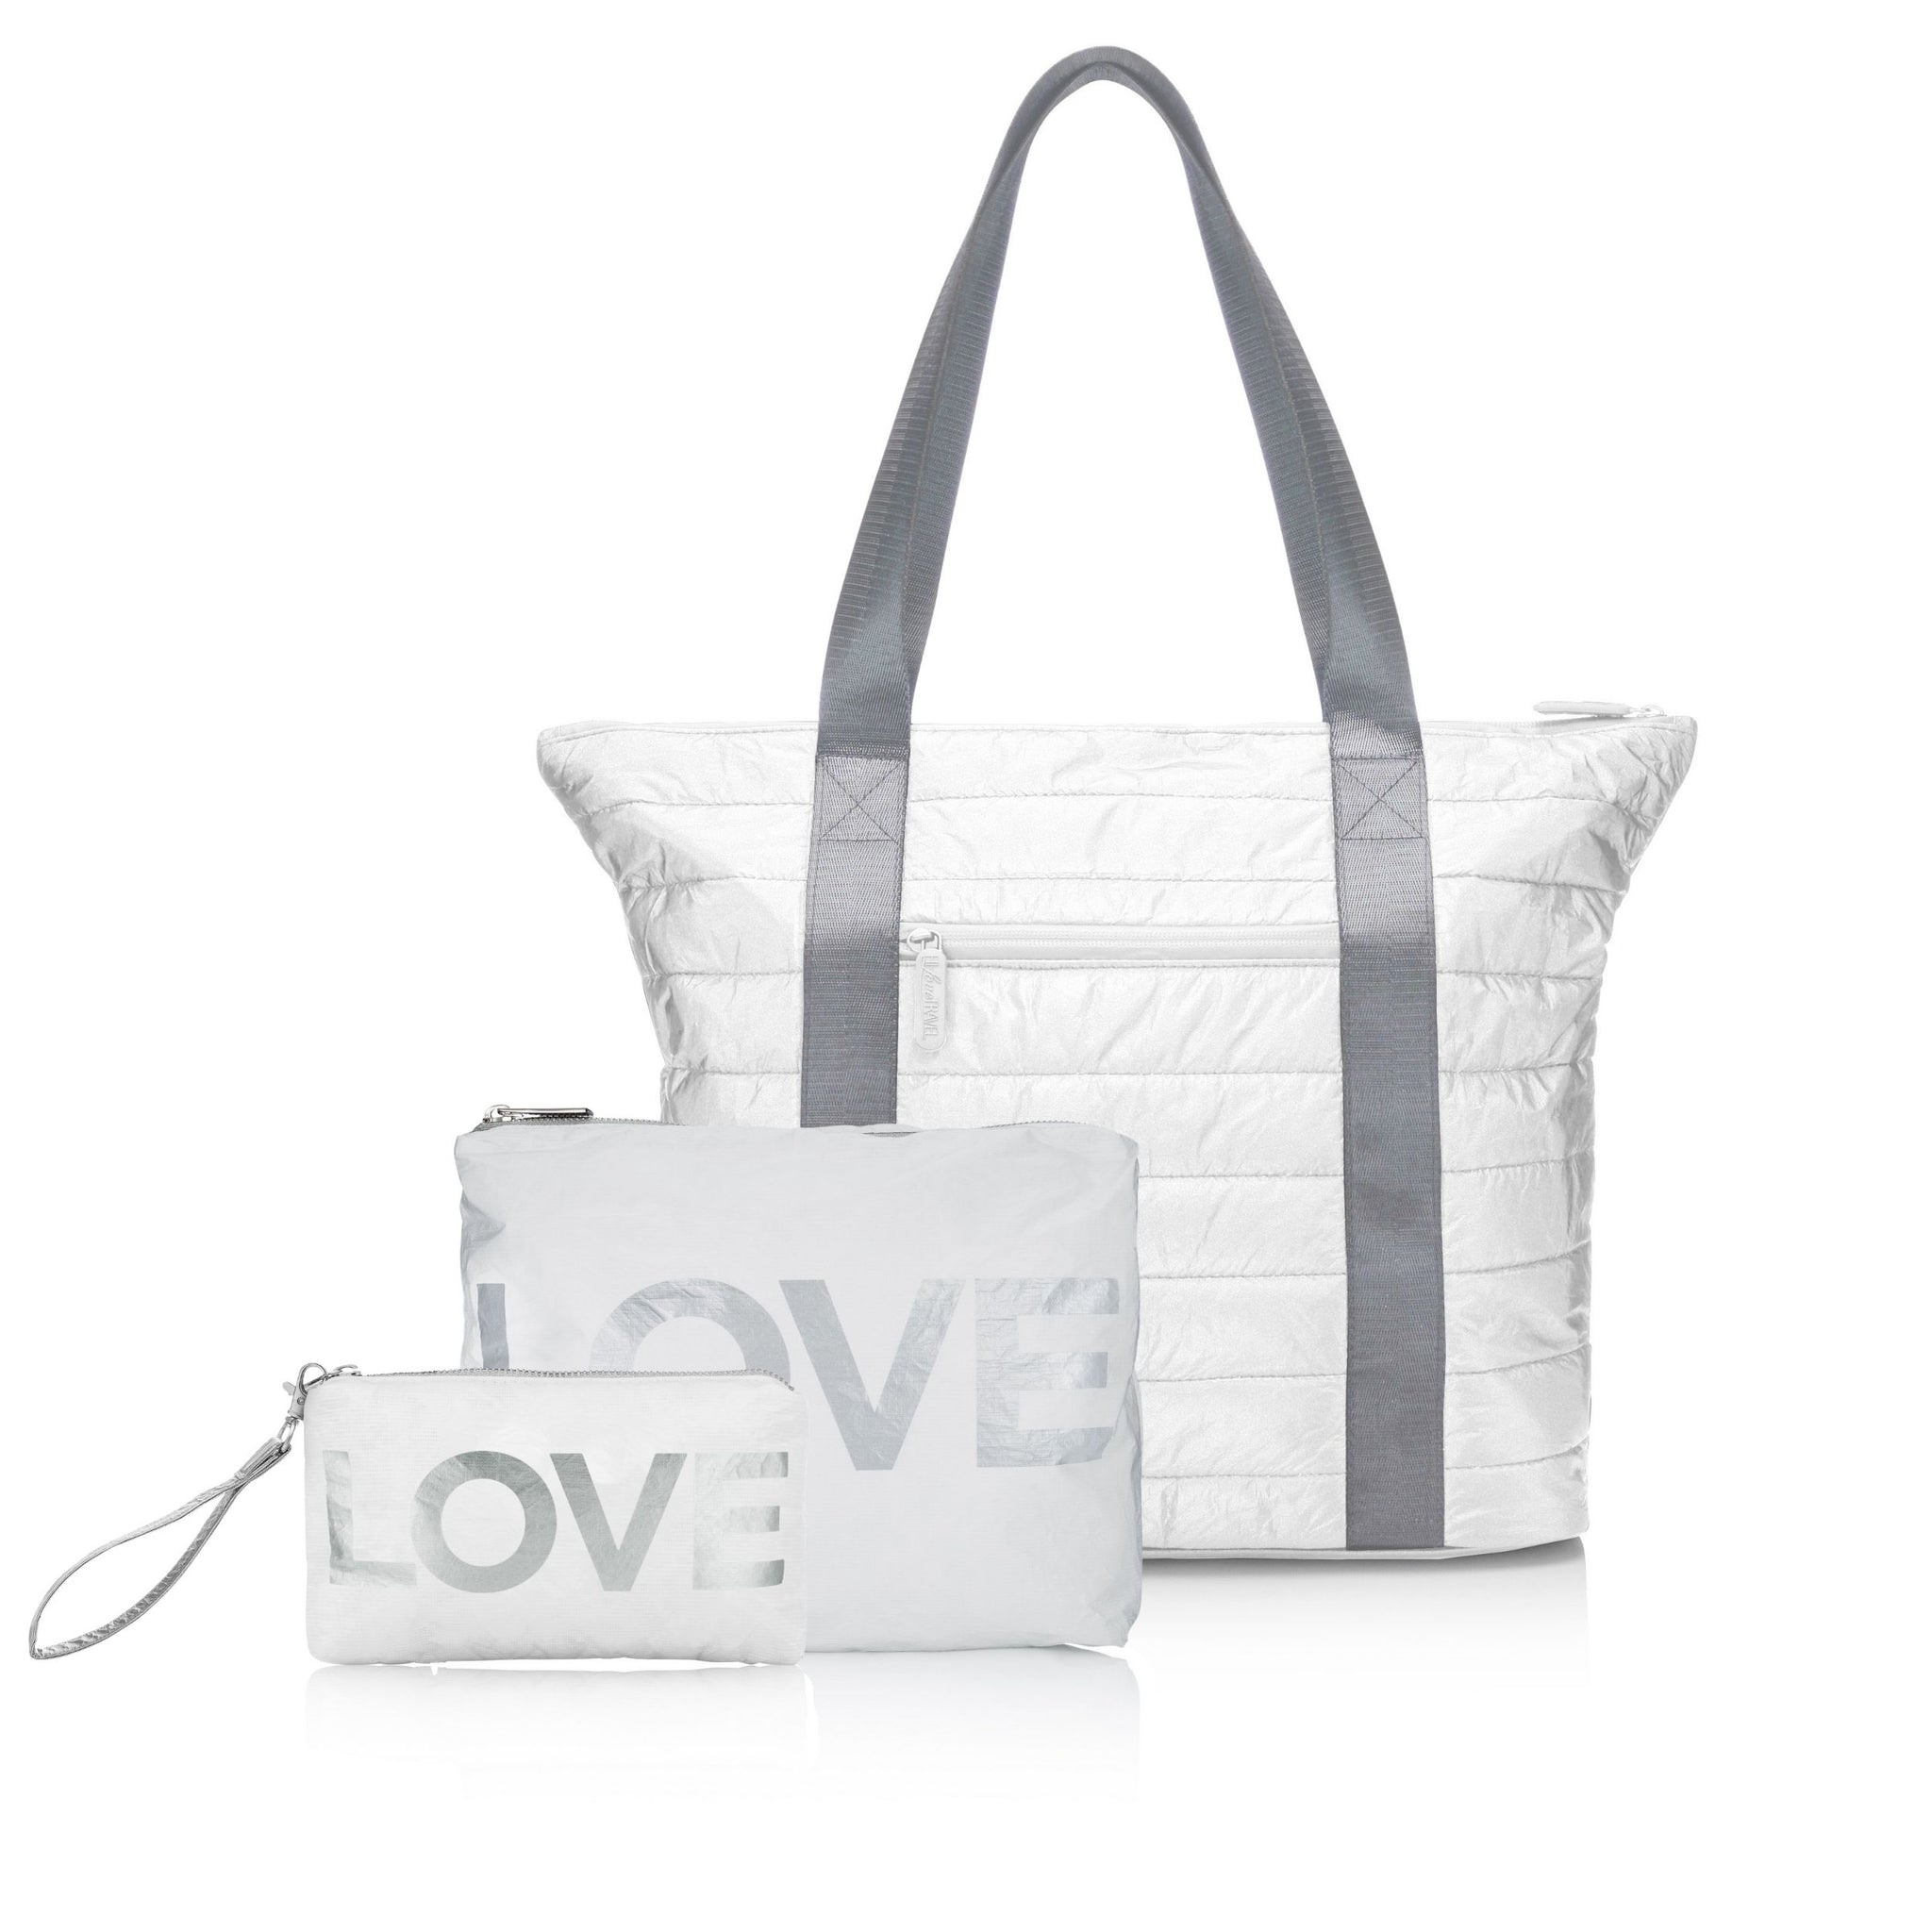 Set of Three Travel Packs - Everyday Tote Set in Shimmer White